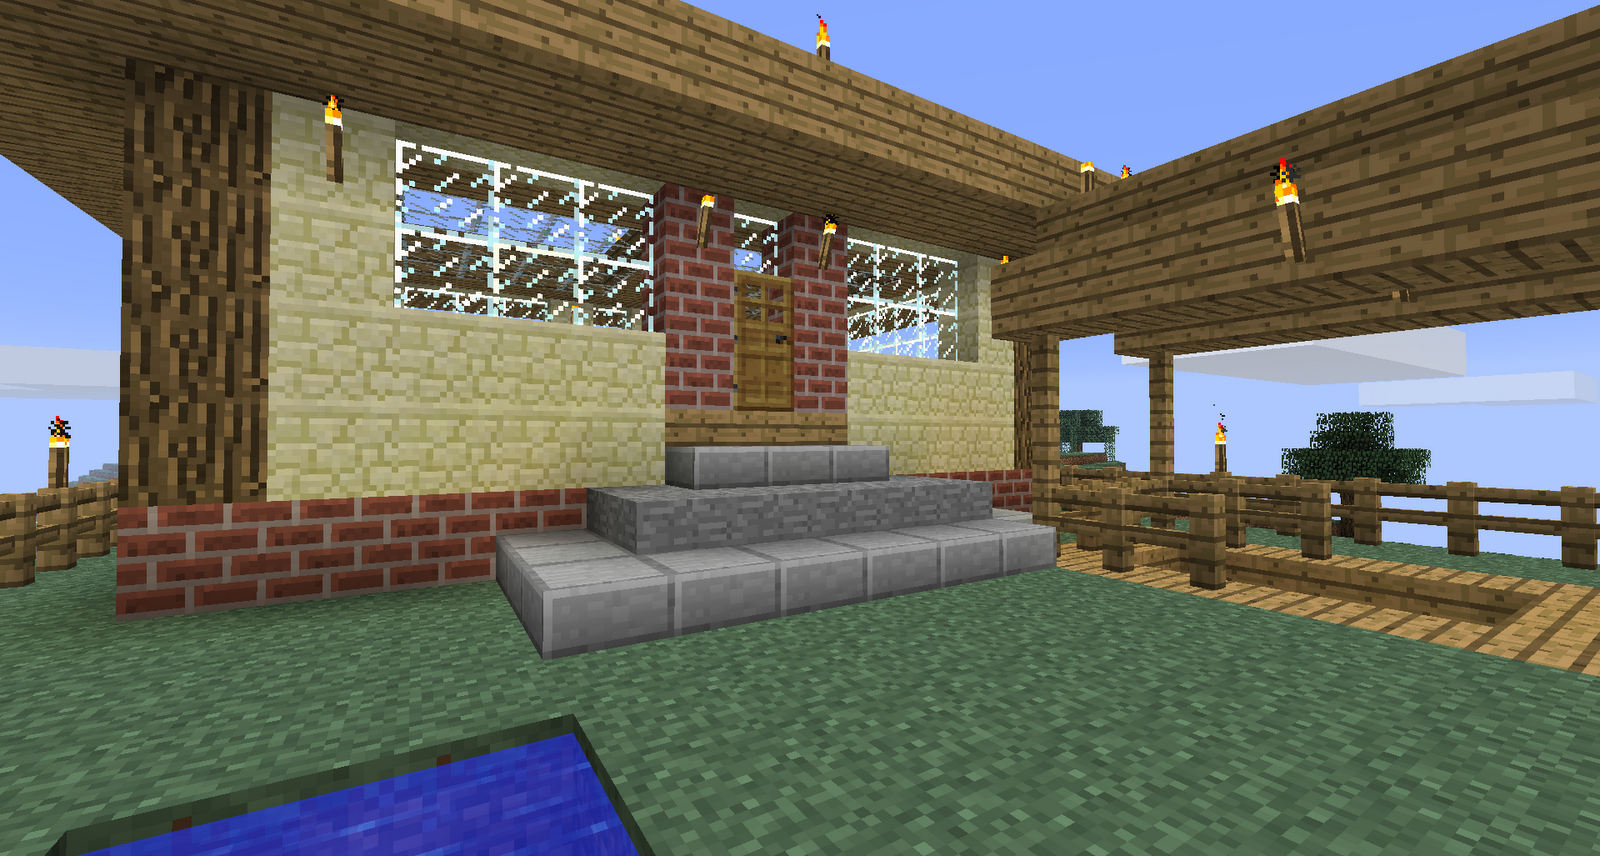 That's interesting...: Inside my Minecraft home